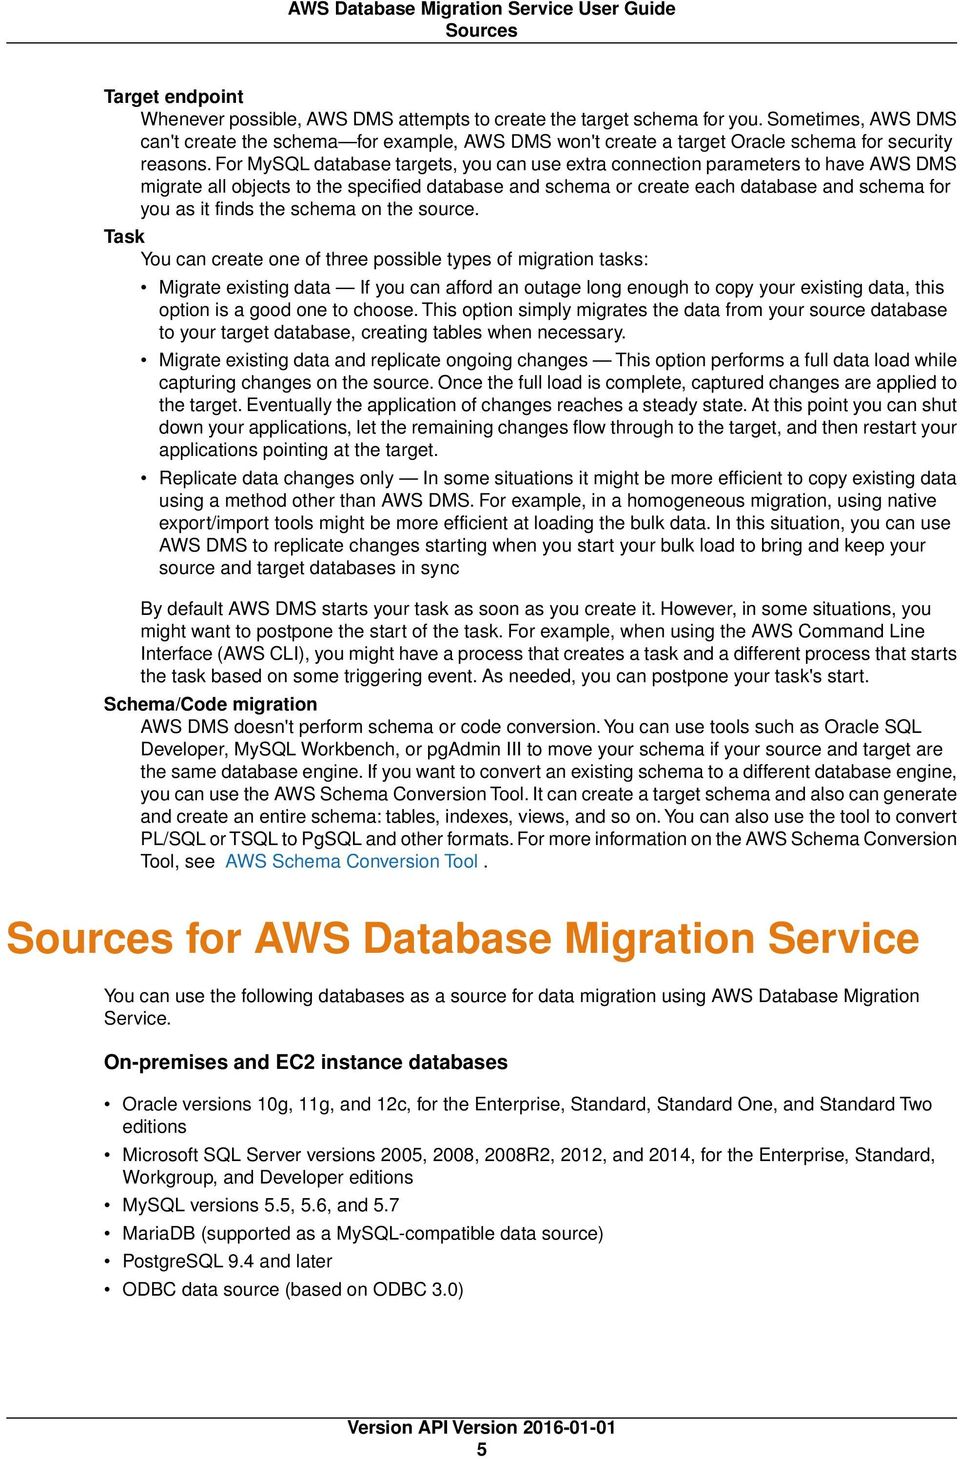 For MySQL database targets, you can use extra connection parameters to have AWS DMS migrate all objects to the specified database and schema or create each database and schema for you as it finds the